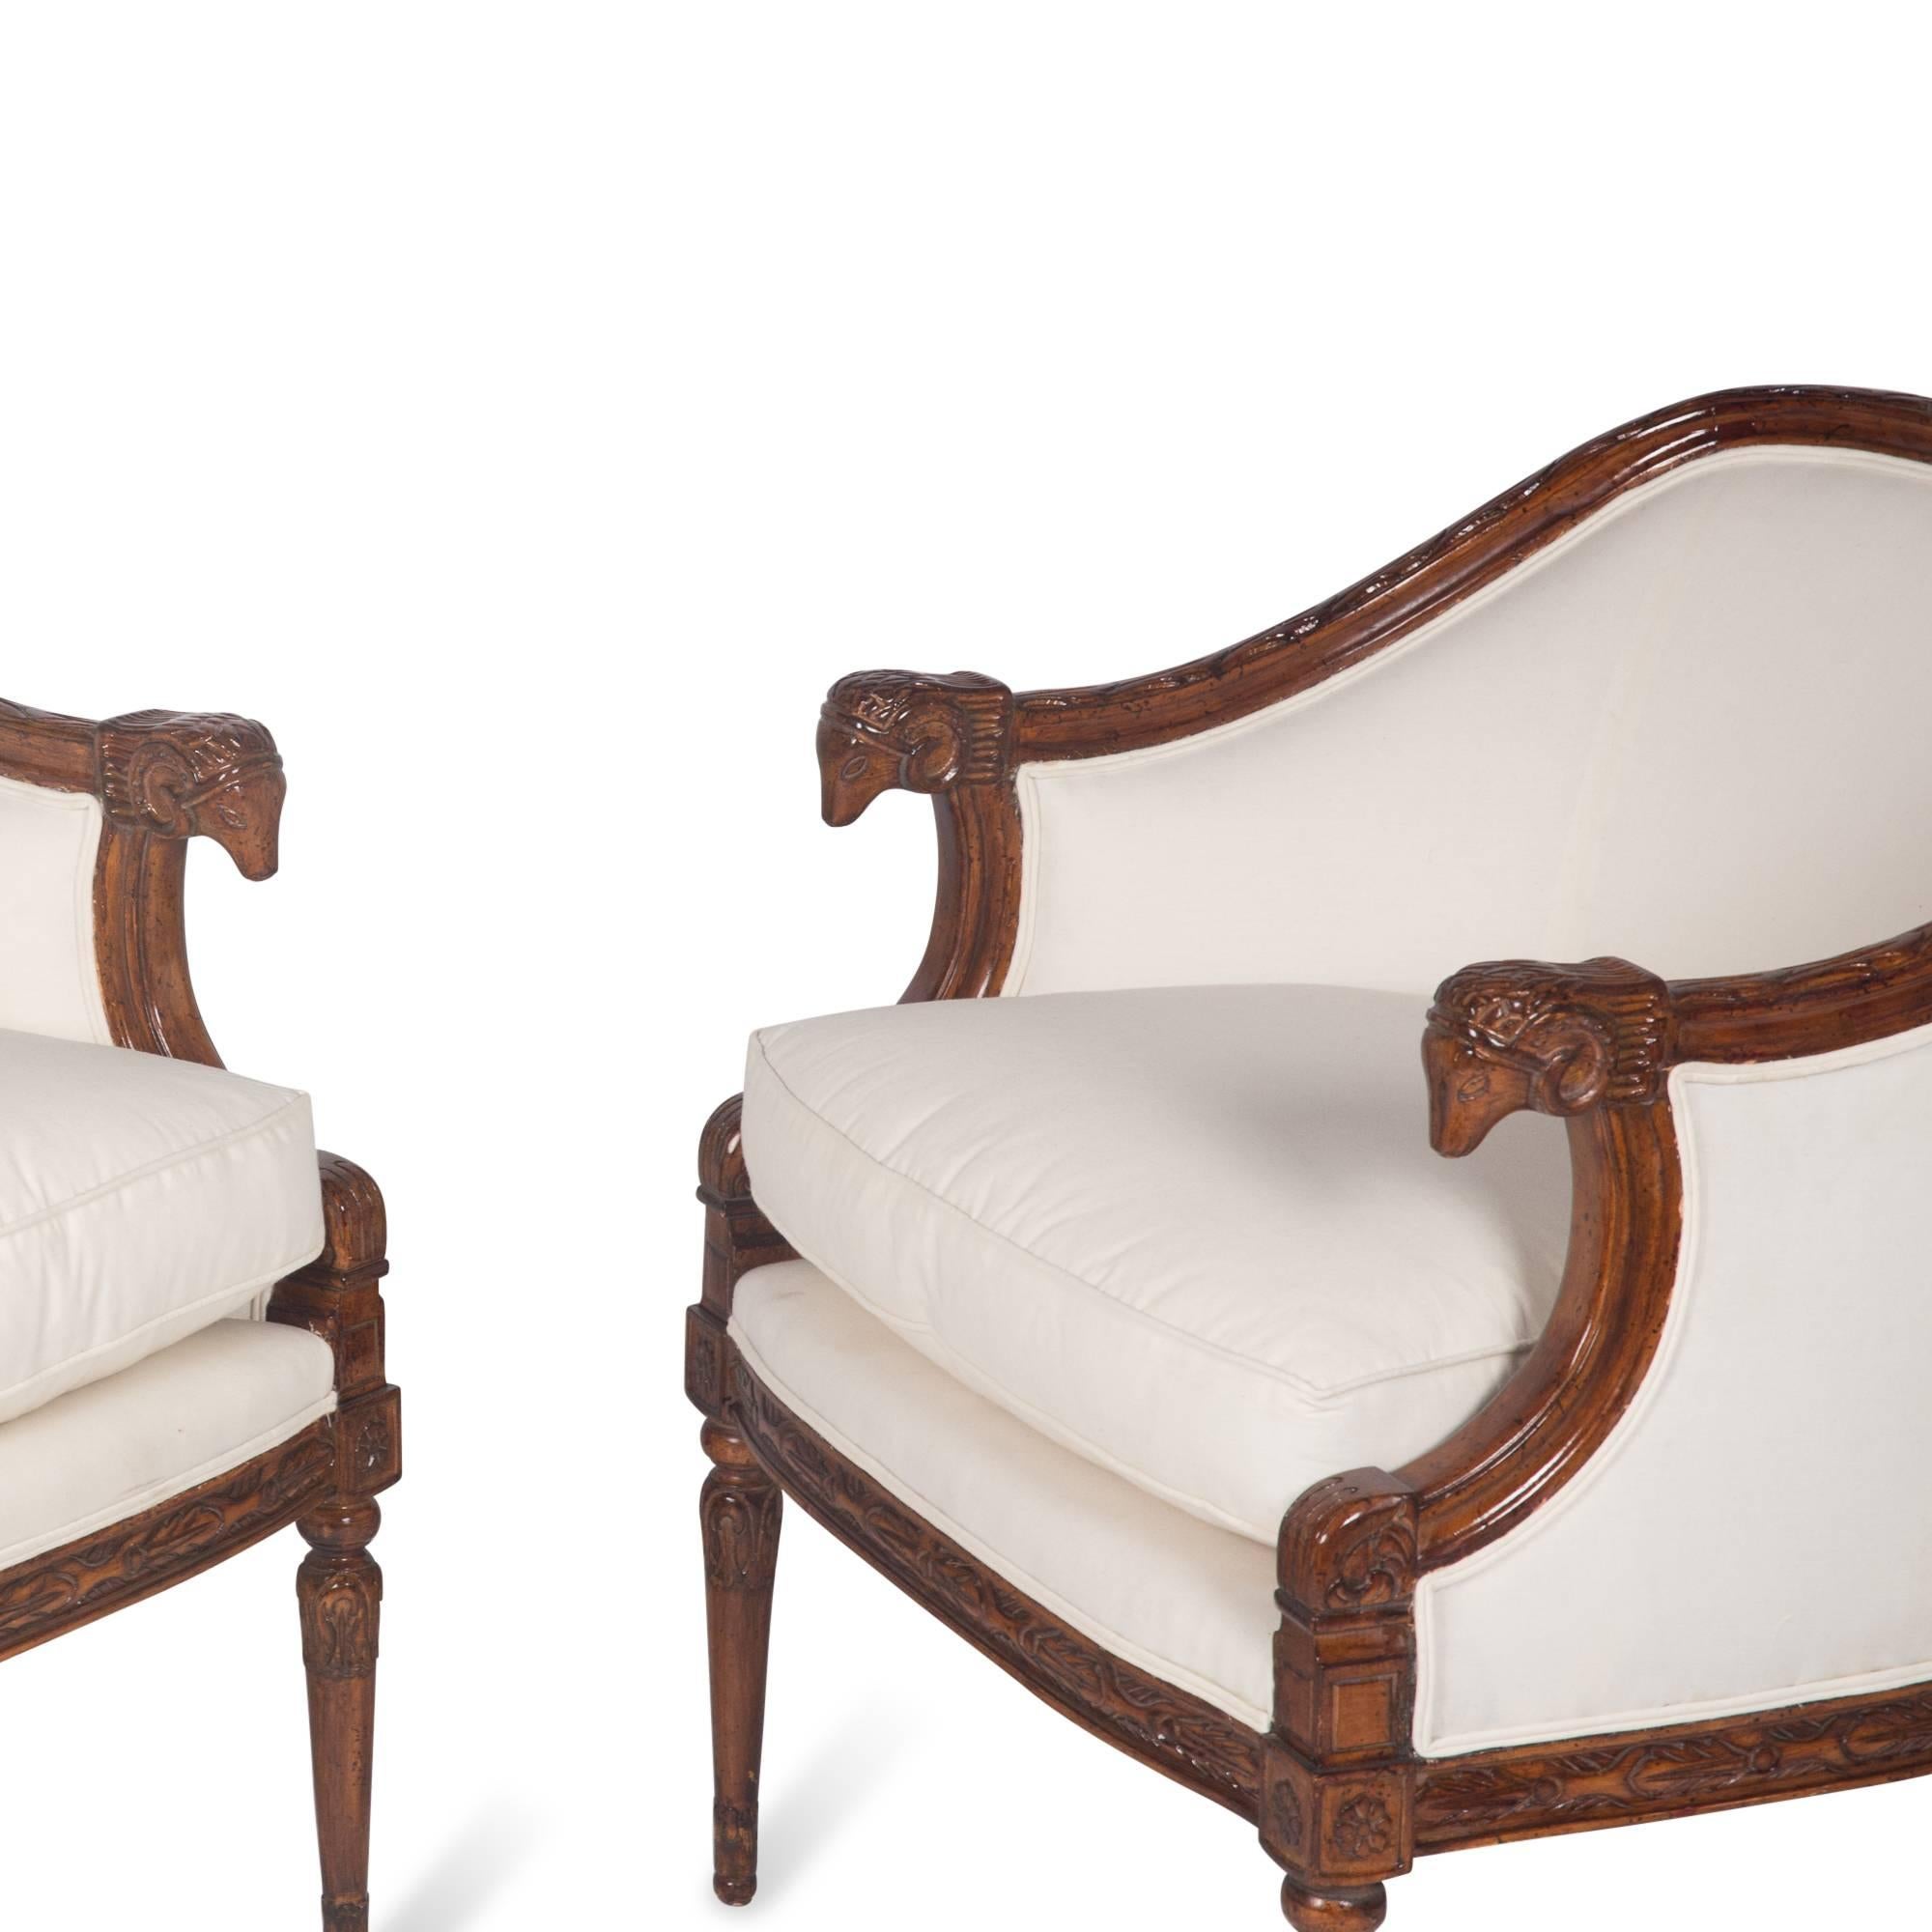 Mid-20th Century Pair of Carved Mahogany Armchairs, German, 1930s For Sale